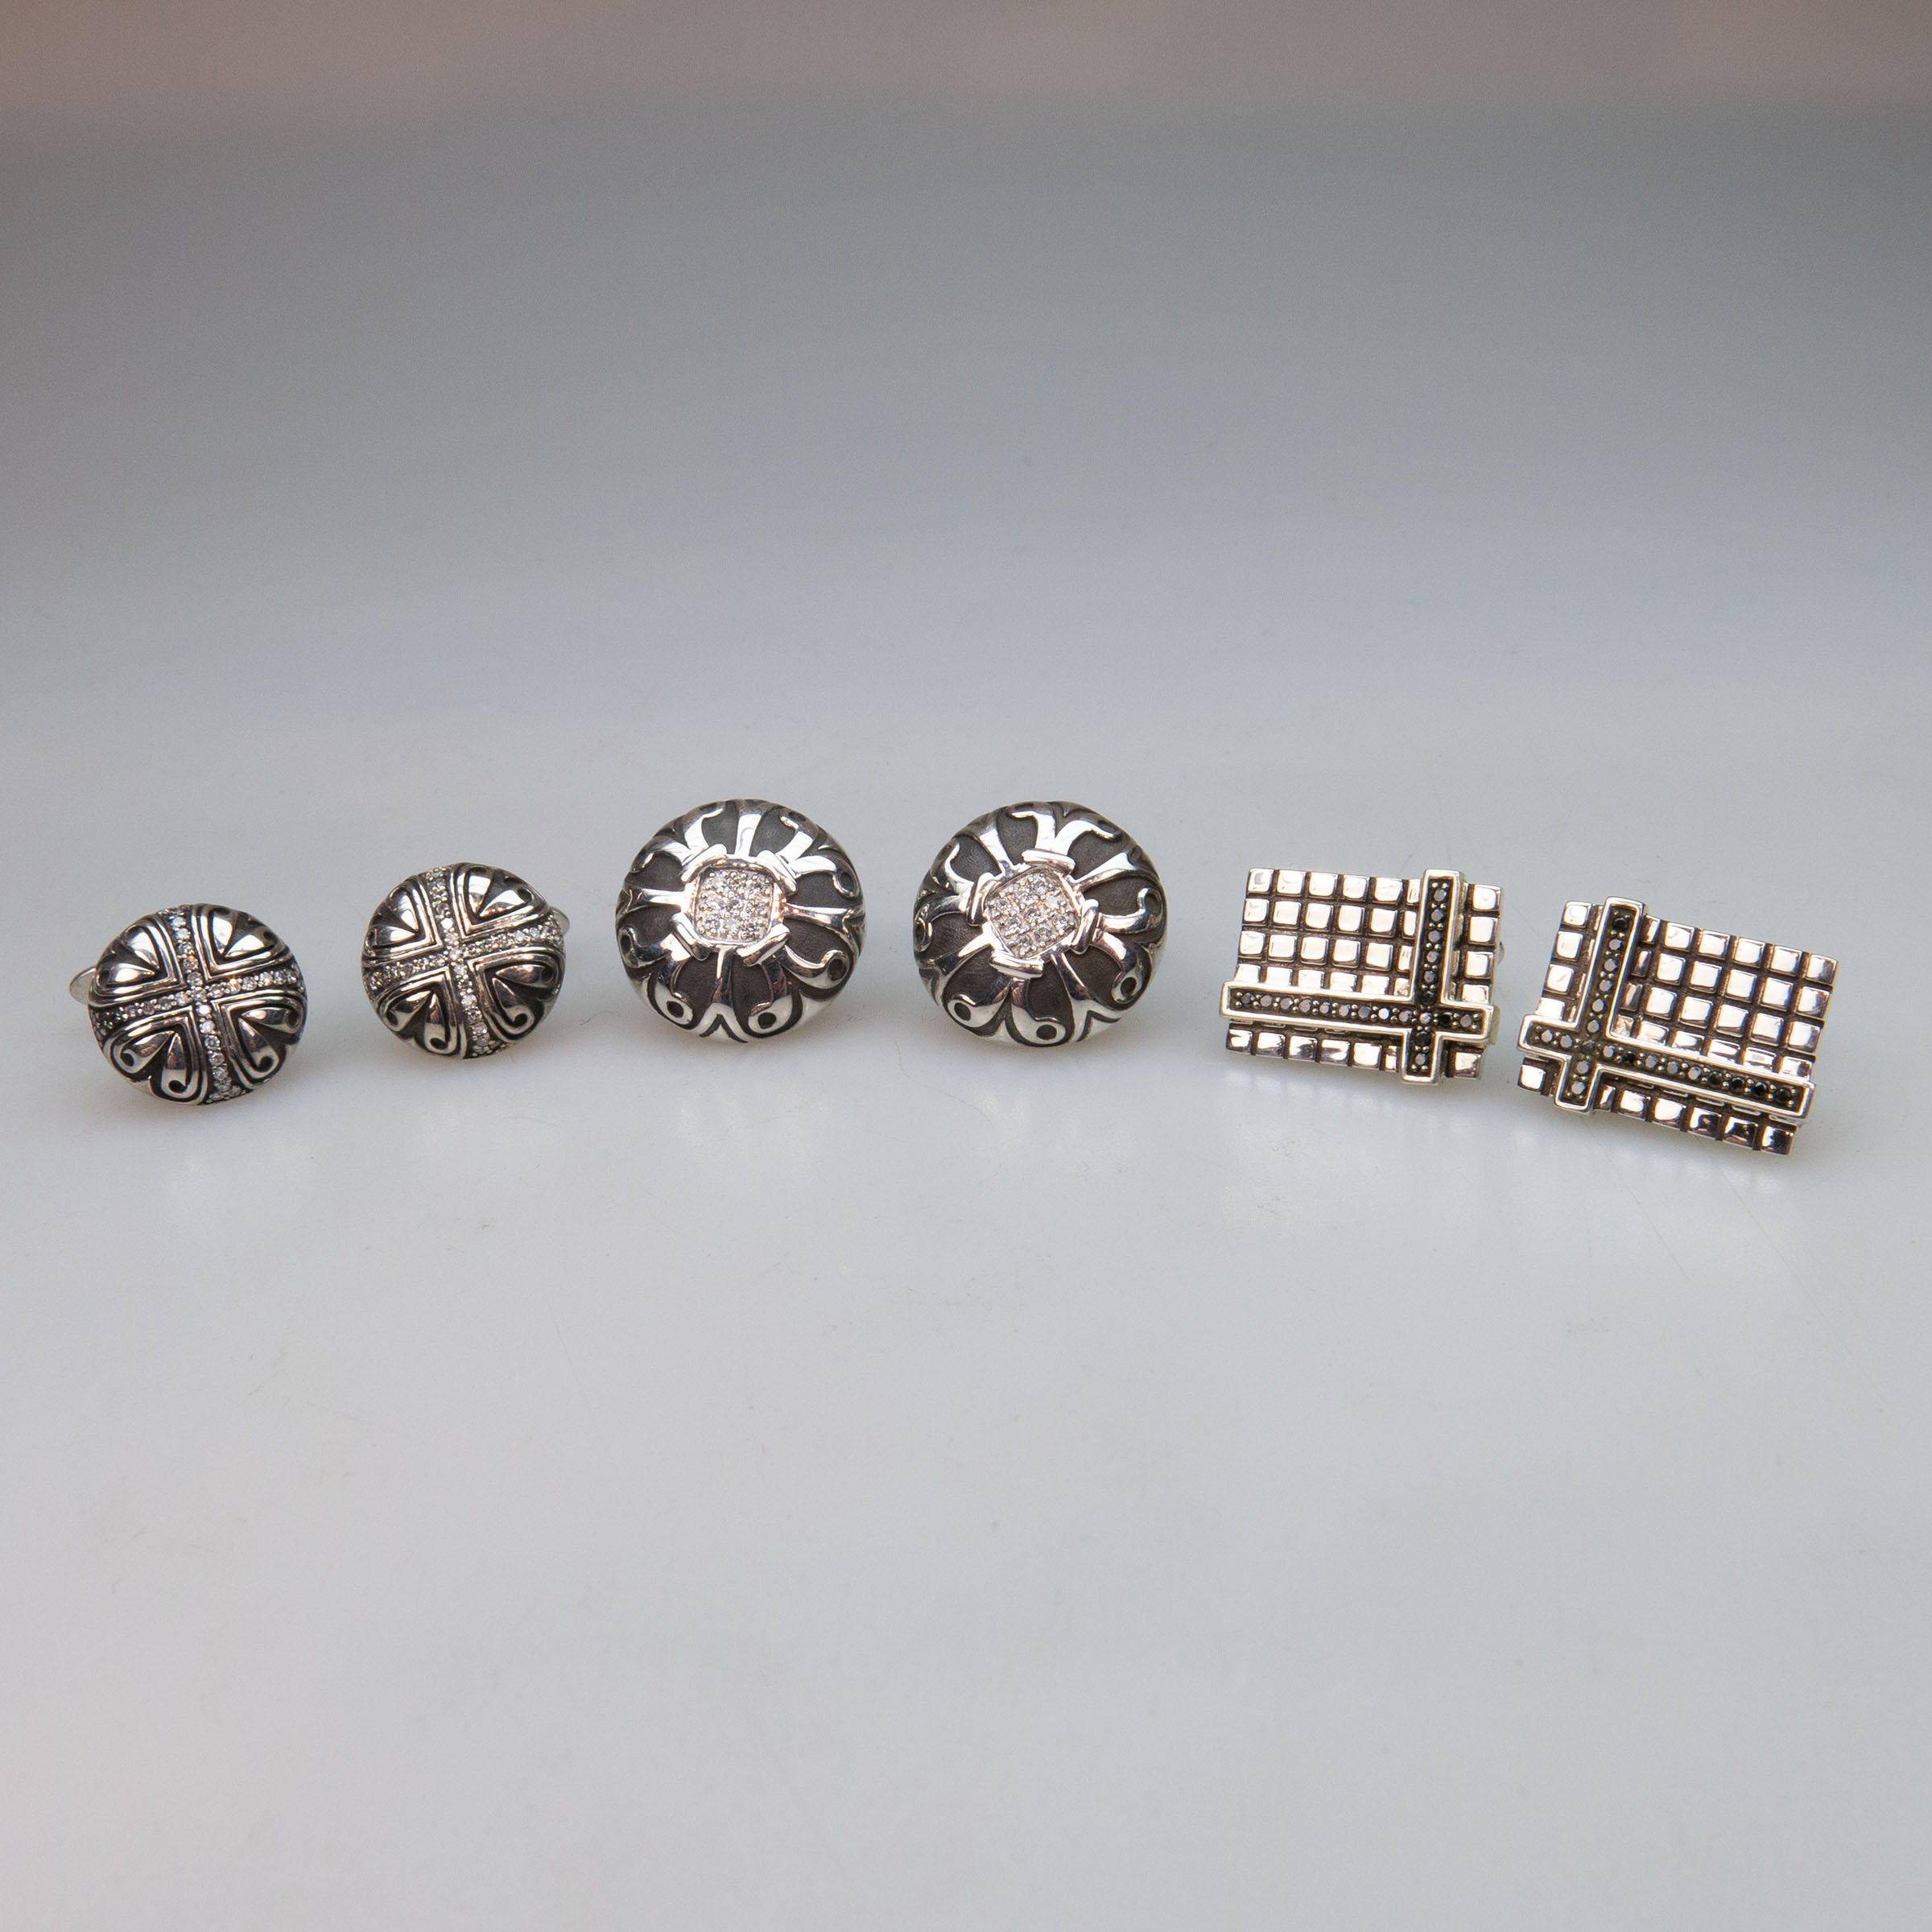 3 Pairs Of Sterling Silver Cufflinks